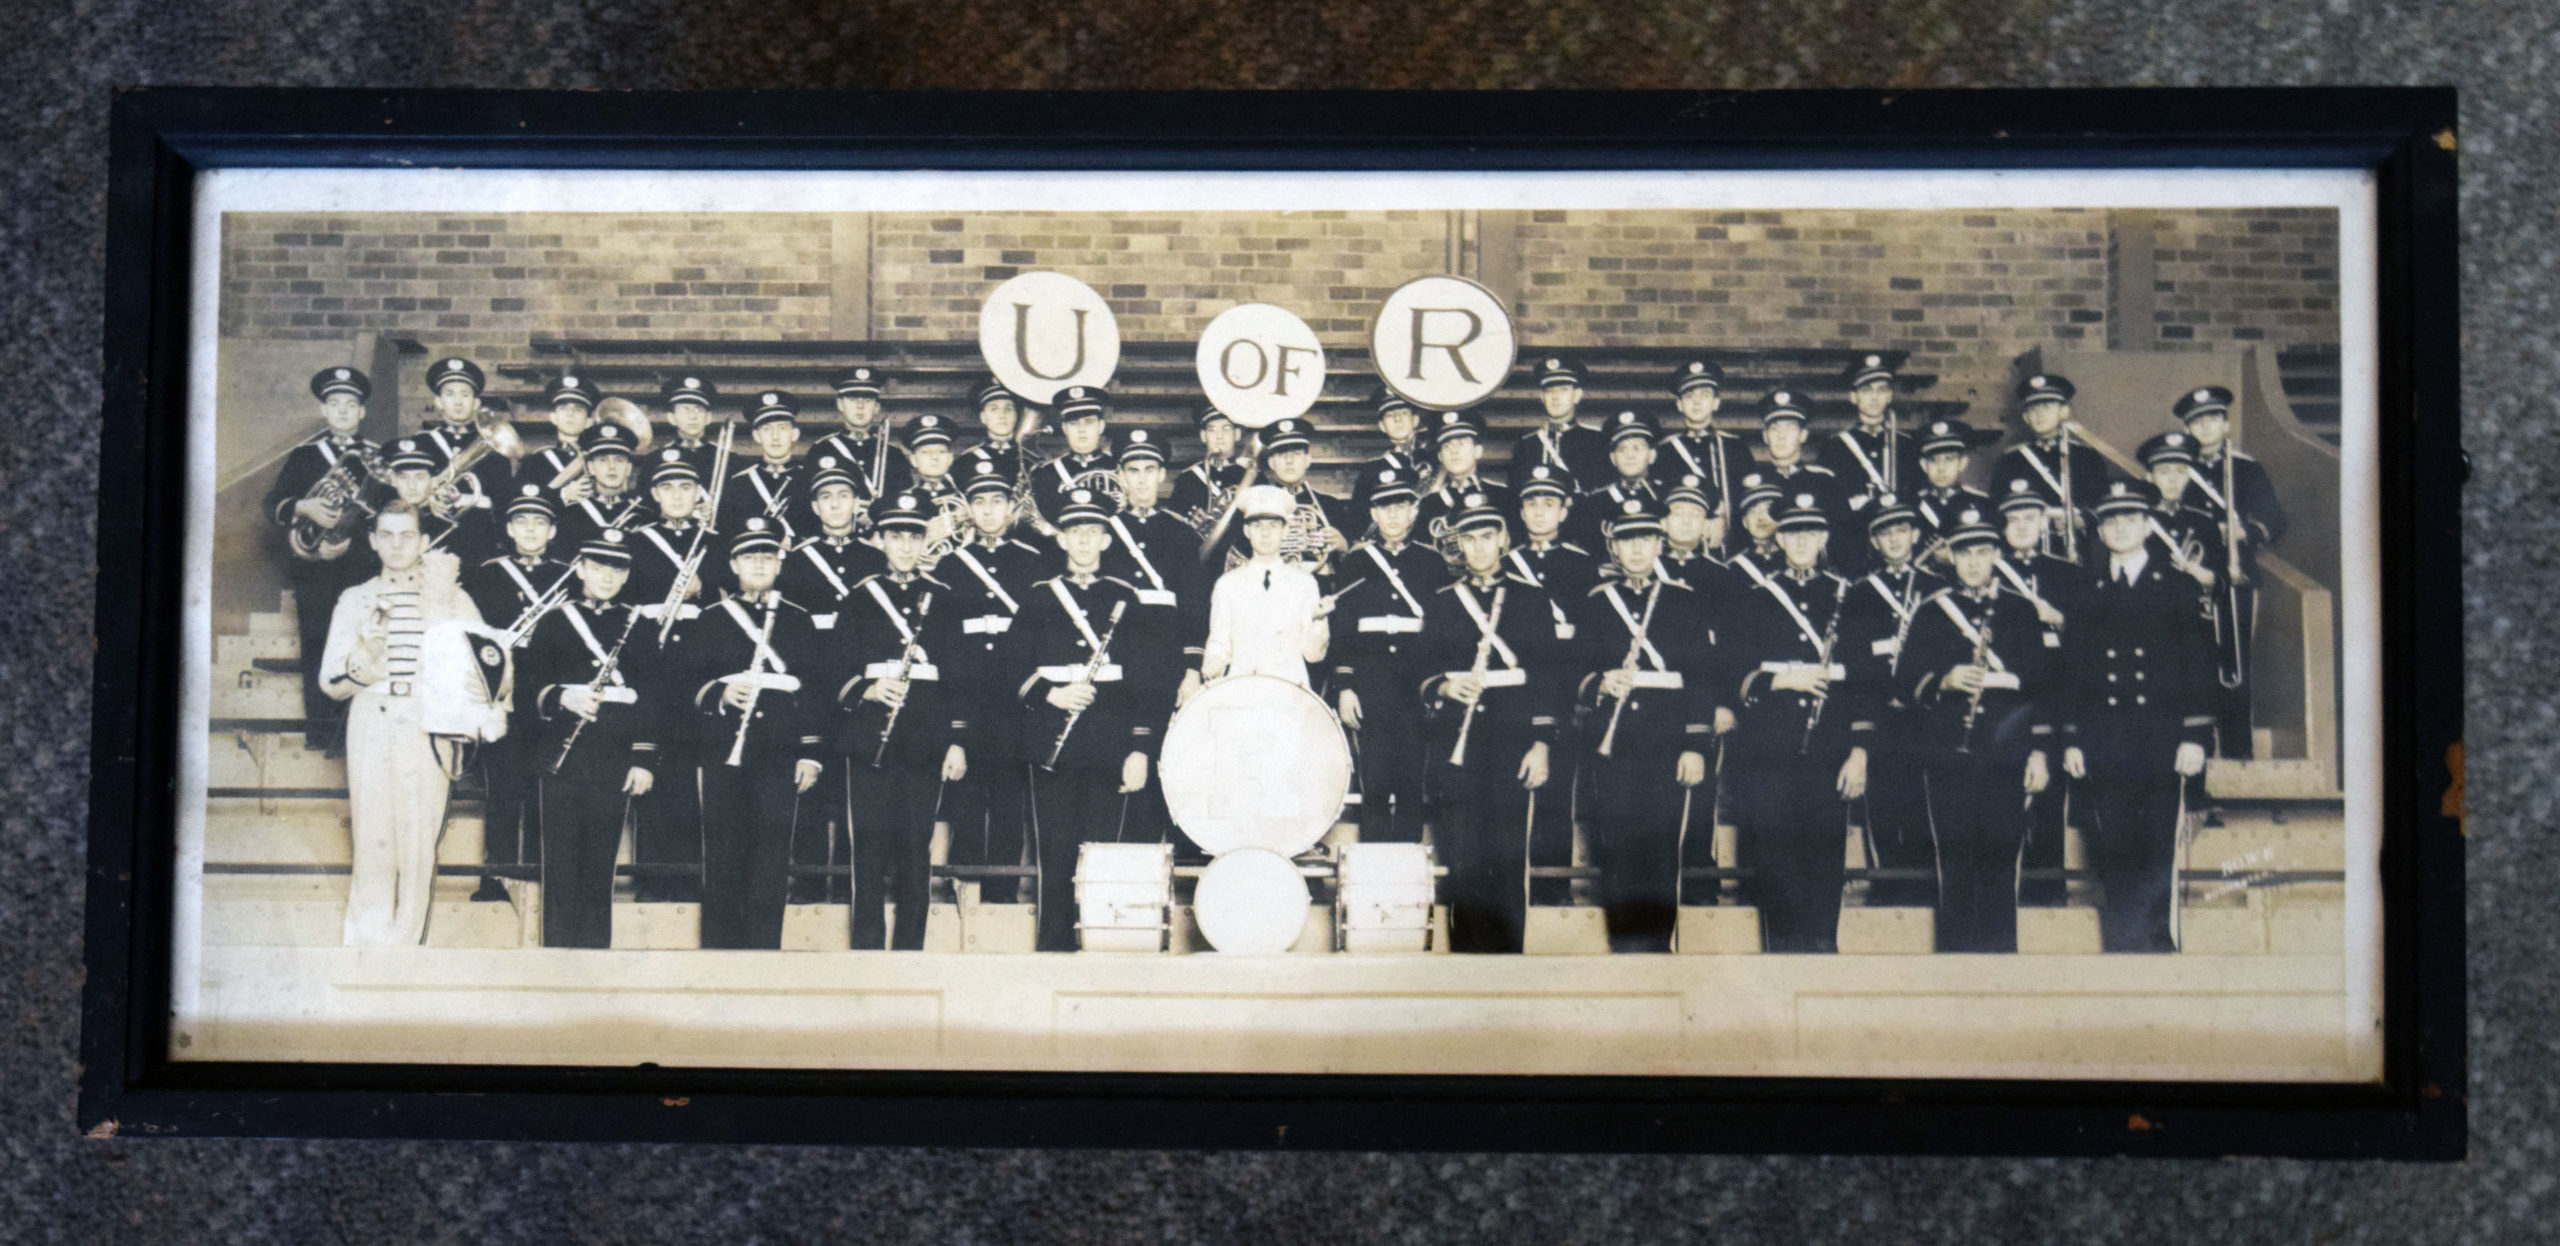 University of Rochester Marching Band (1937)